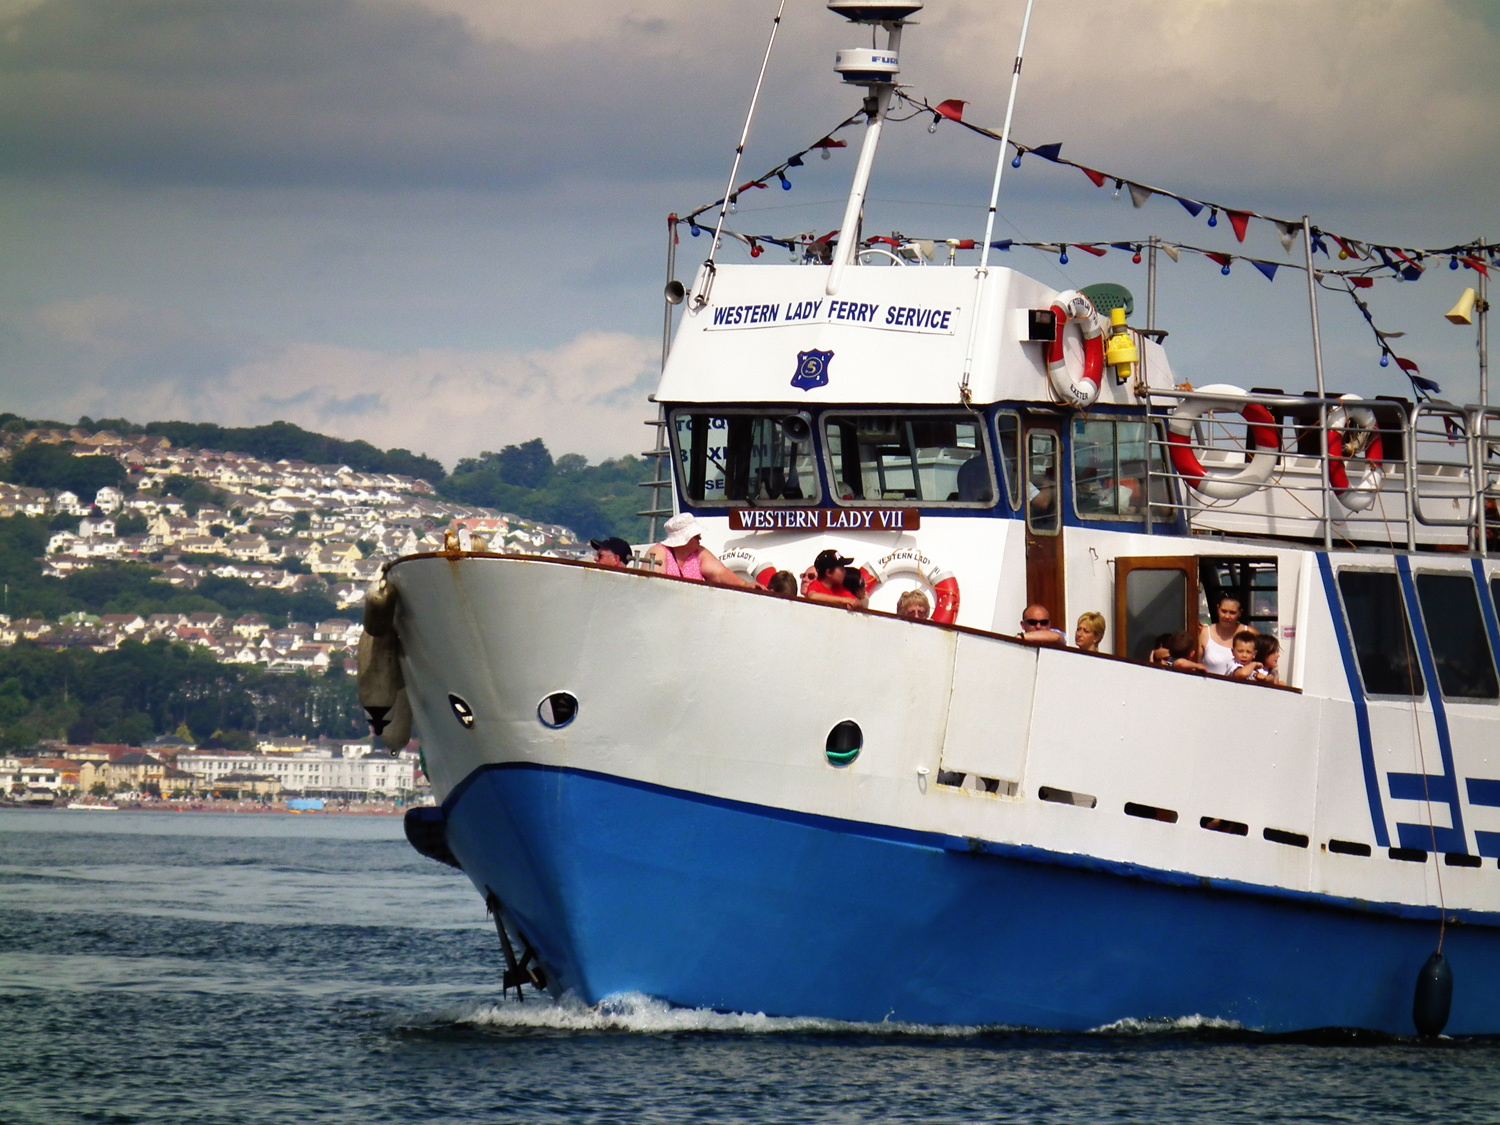 Passenger ferry services across Torbay linking the English Riviera towns - a great way for people on short breaks to travel in the spring,summer and autumn